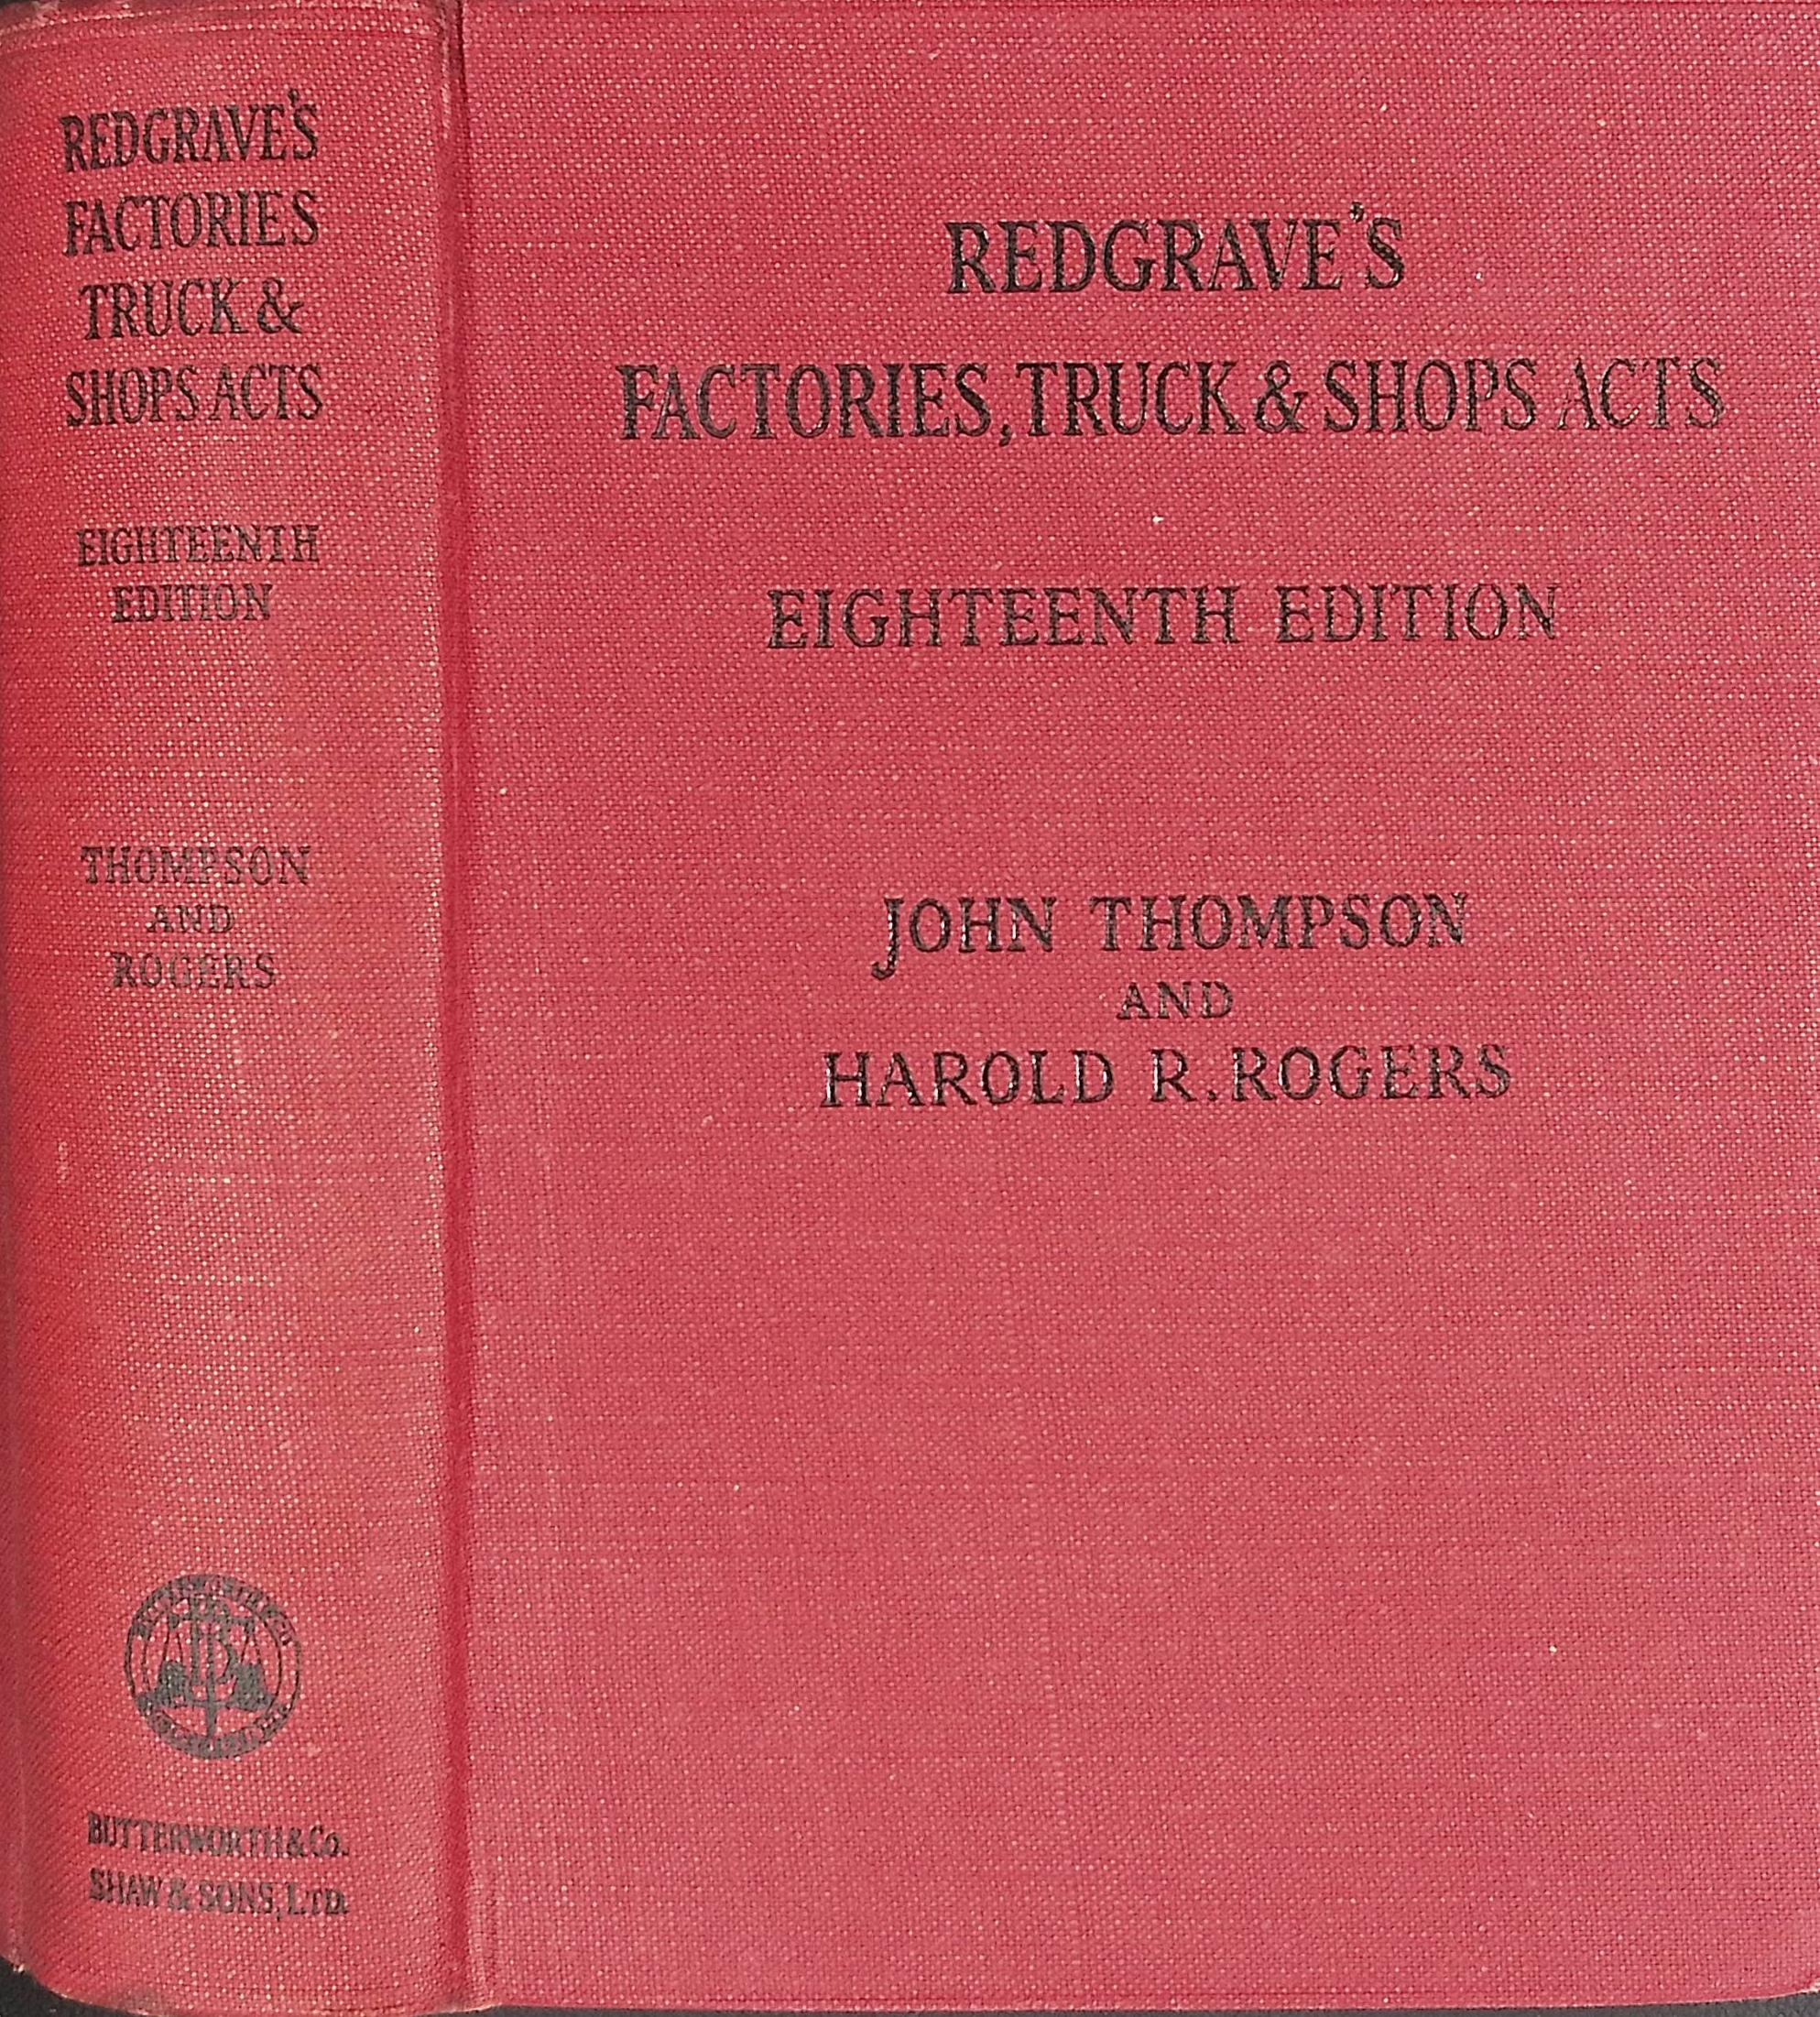 Redgrave's Factories, Truck and Shops Acts. 1952.